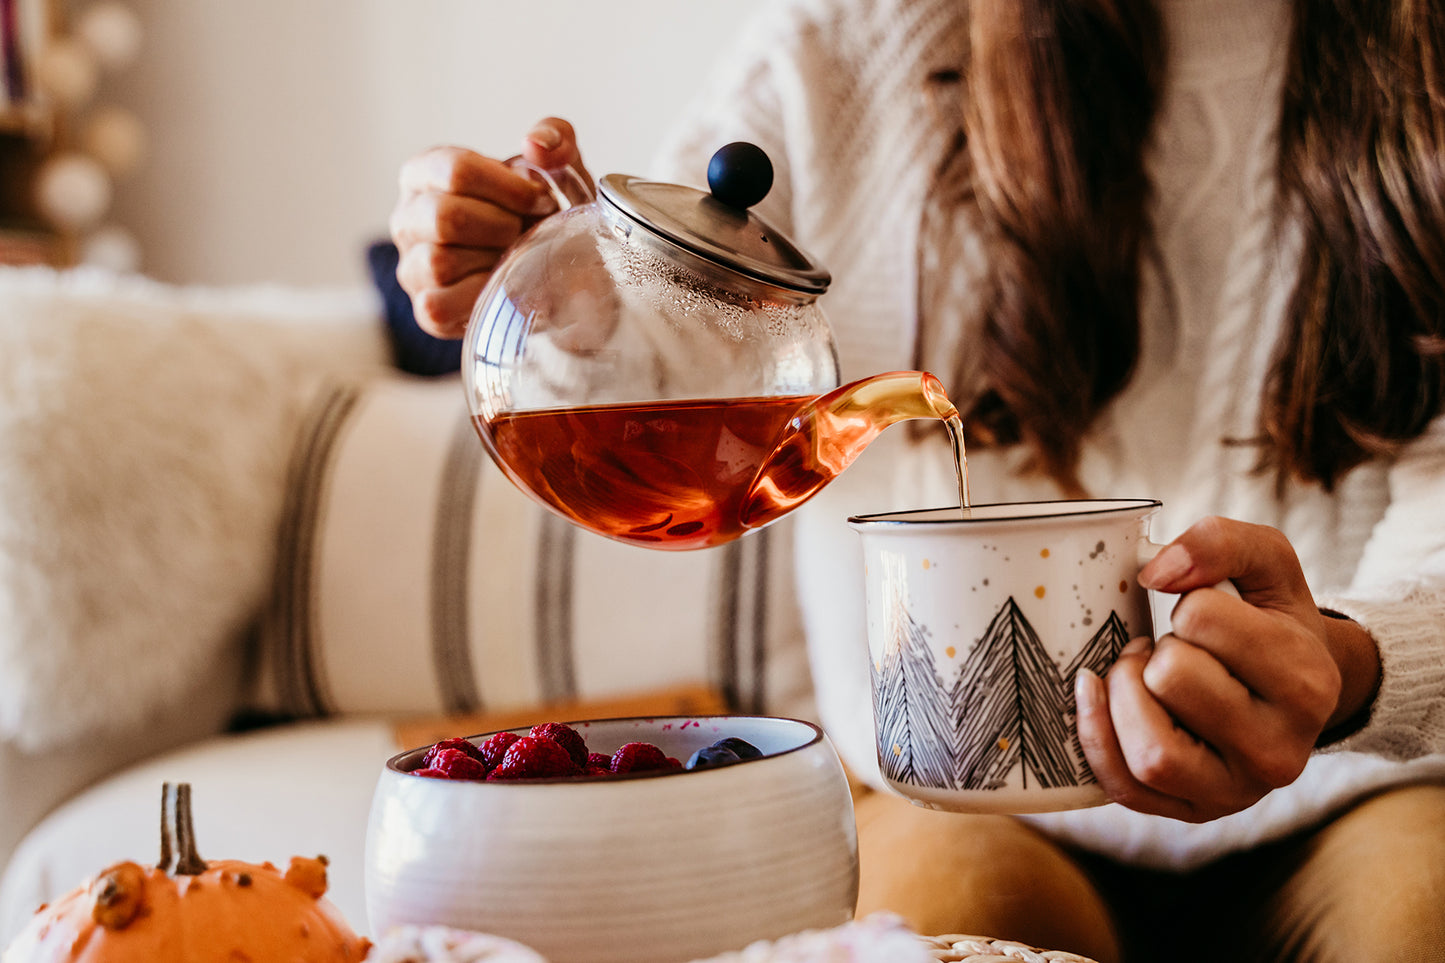 The Beginner’s Guide to Starting Your Tea Journey